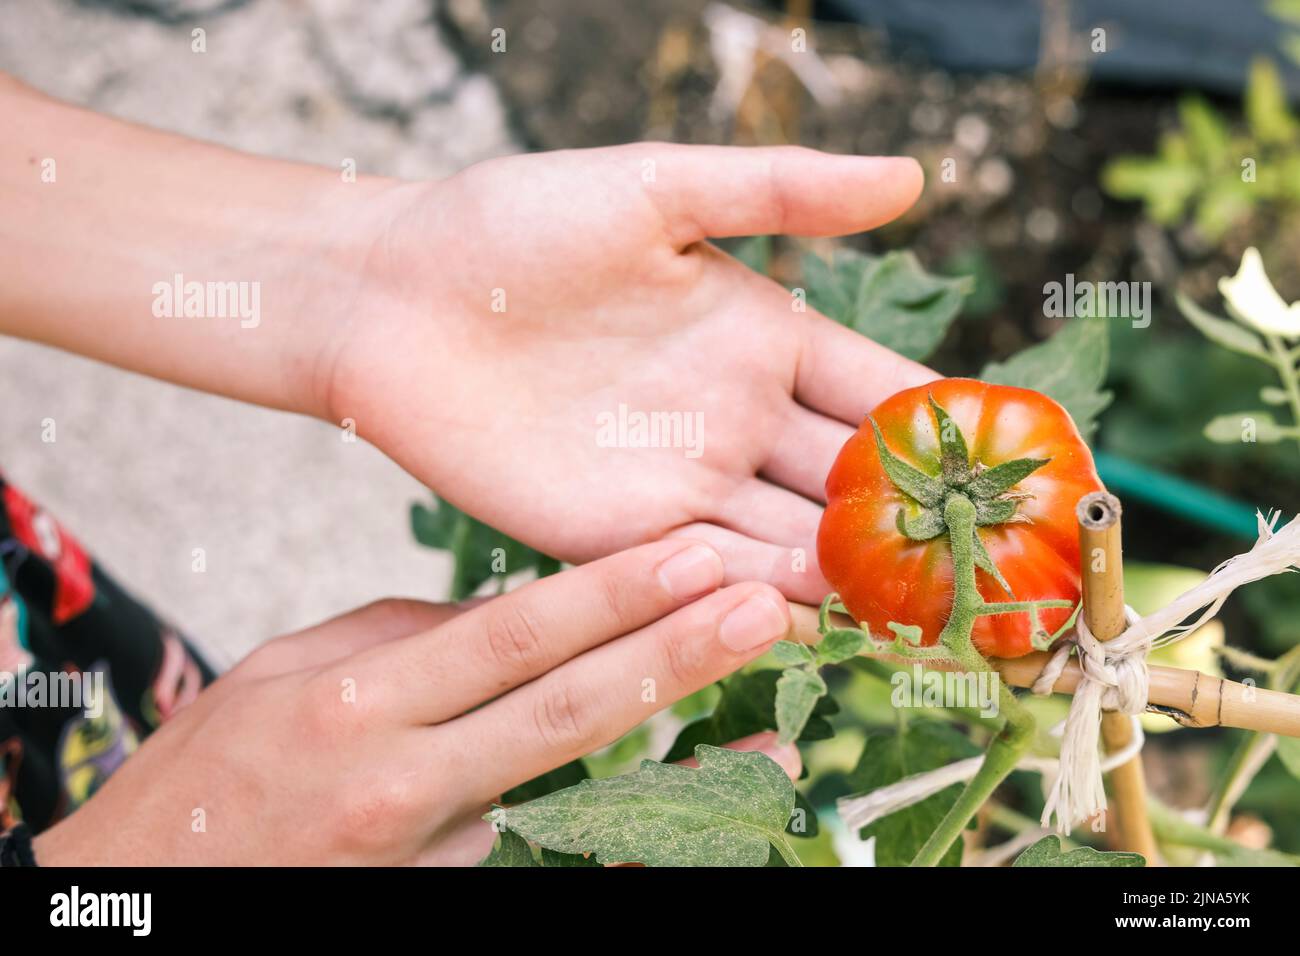 Close-Up of a person's hand checking a tomato plant in the garden Stock Photo